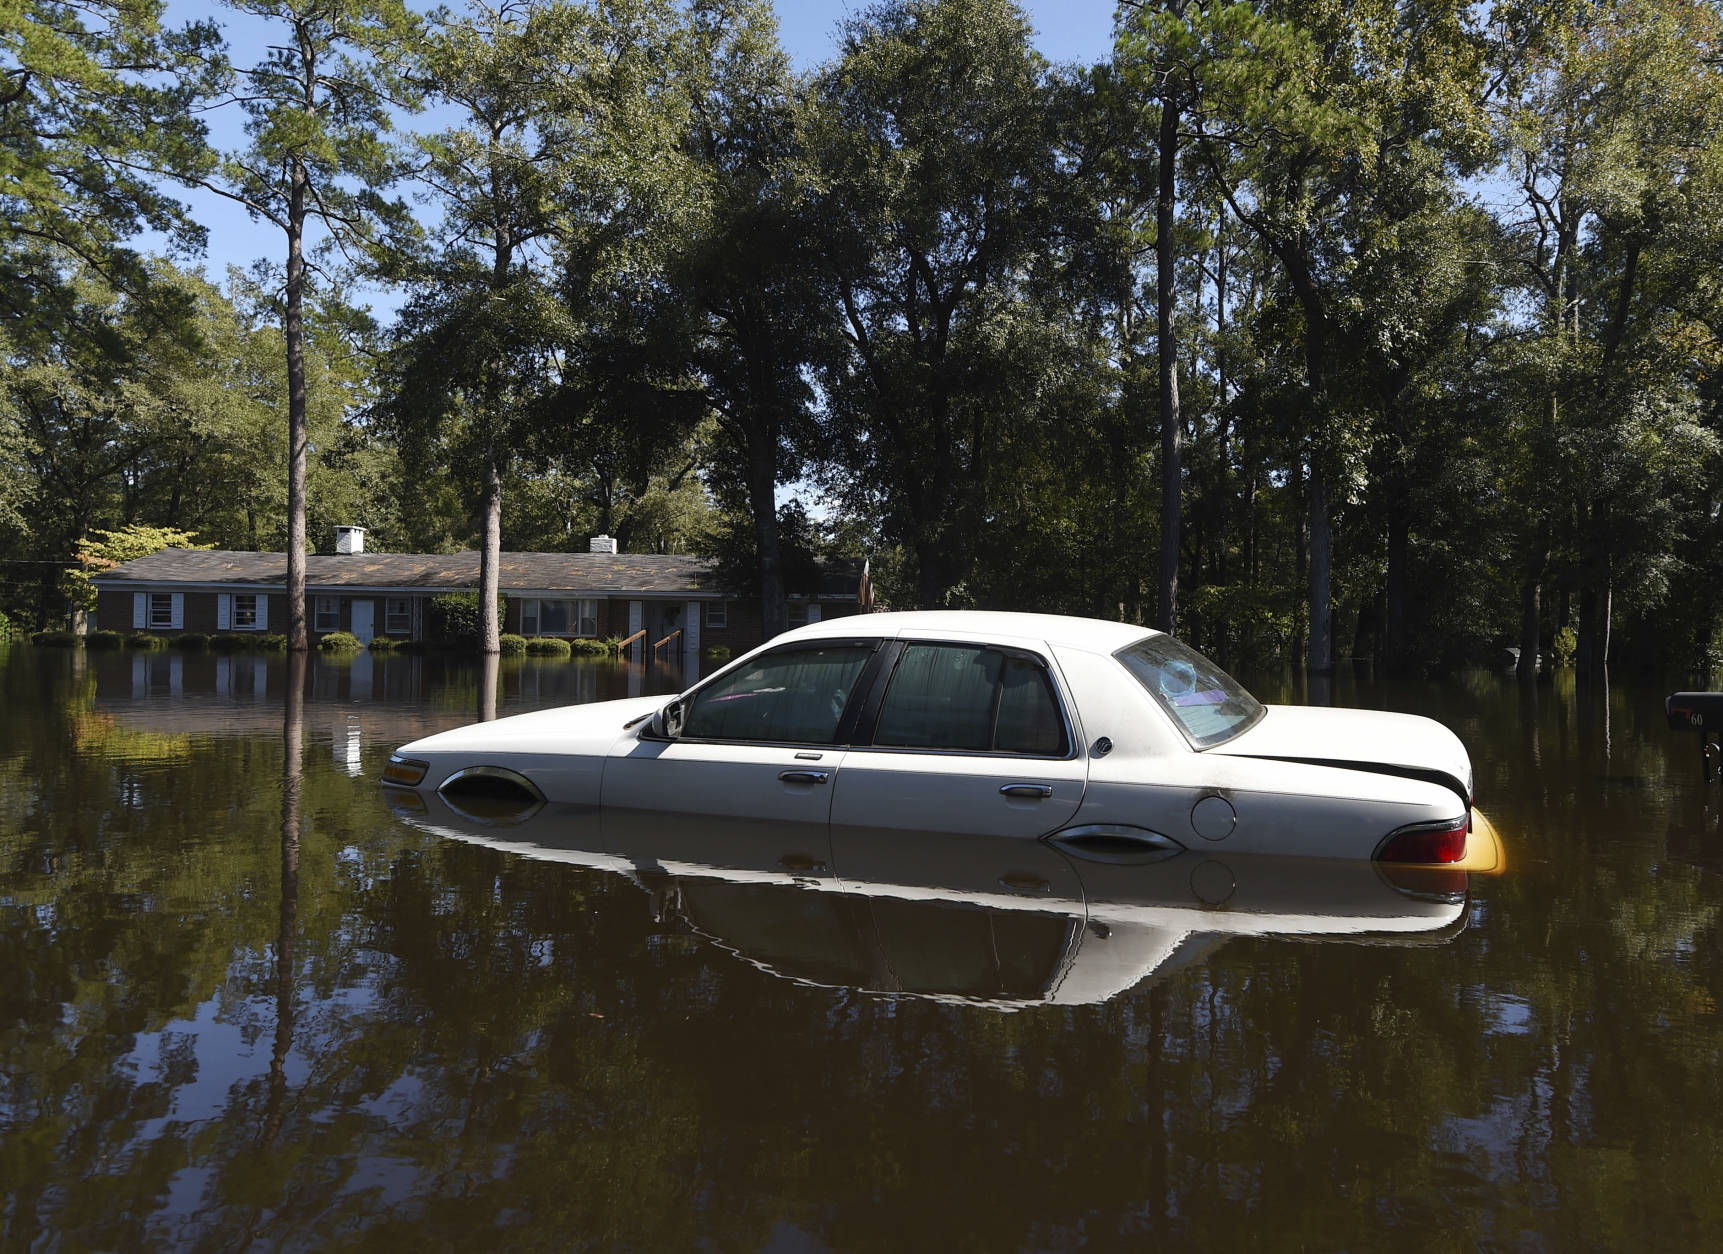 A car is surrounded by floodwaters on Highway 9, Tuesday, Oct. 11, 2016, in Nichols, S.C. About 150 people were rescued by boats from flooding in the riverside village of Nichols on Monday. (AP Photo/Rainier Ehrhardt)